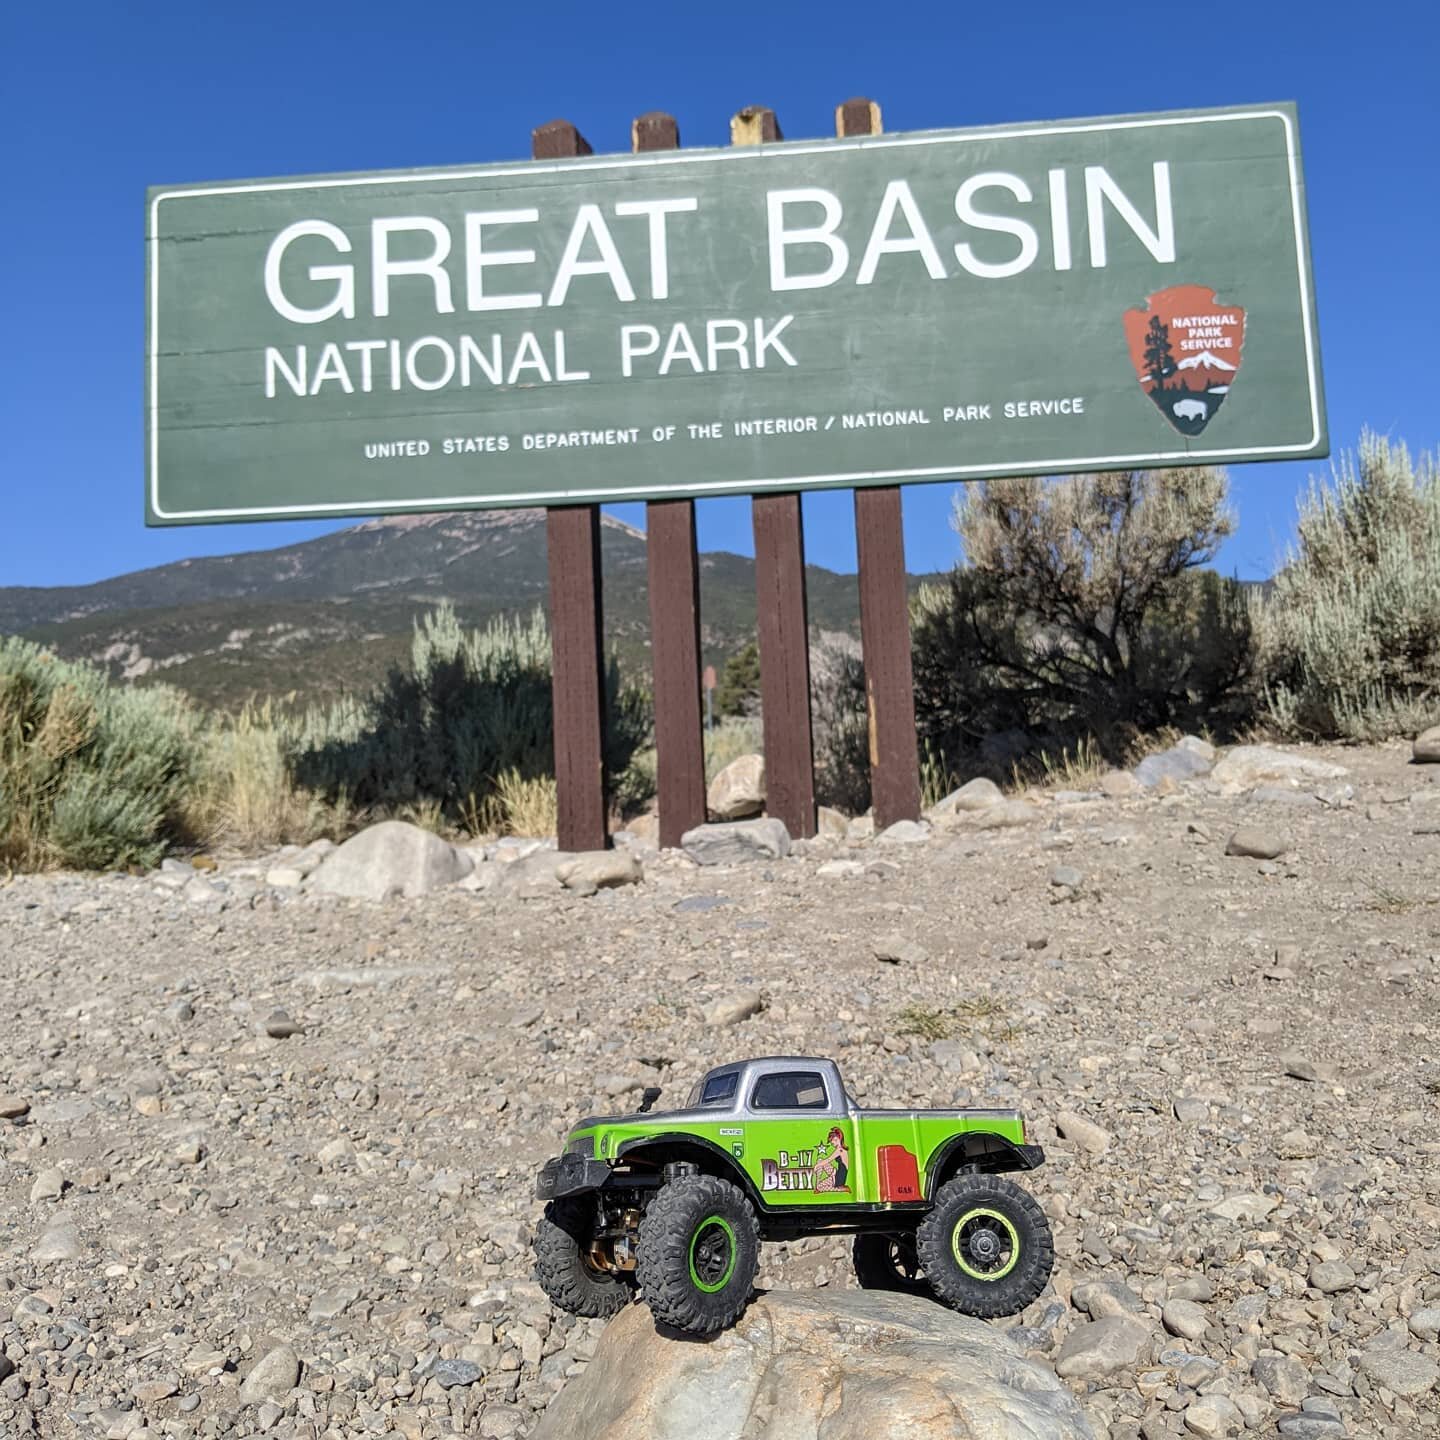 Had to take the Betty on a little family trip to Great Basin last week. After a few weeks of use I have determined the rear steer axle isn't worth it. The servo adds a lot of rear weight and I hardly used the rear steering until I was already in trou